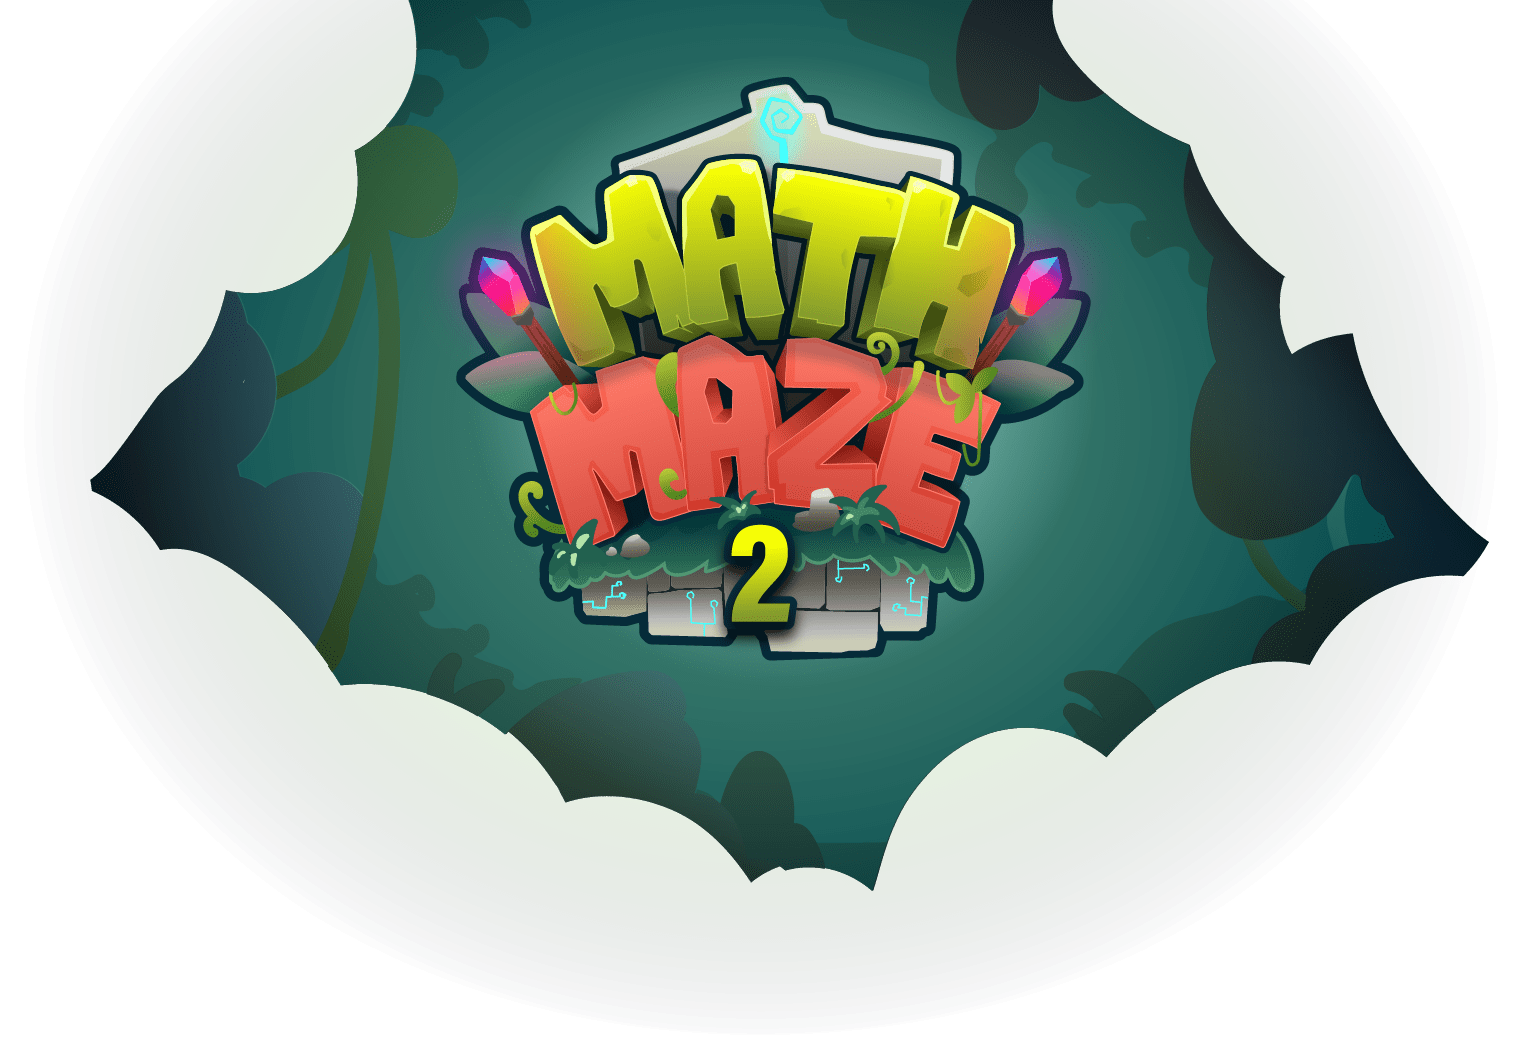 math-maze-2-online-educational-games-gamewise